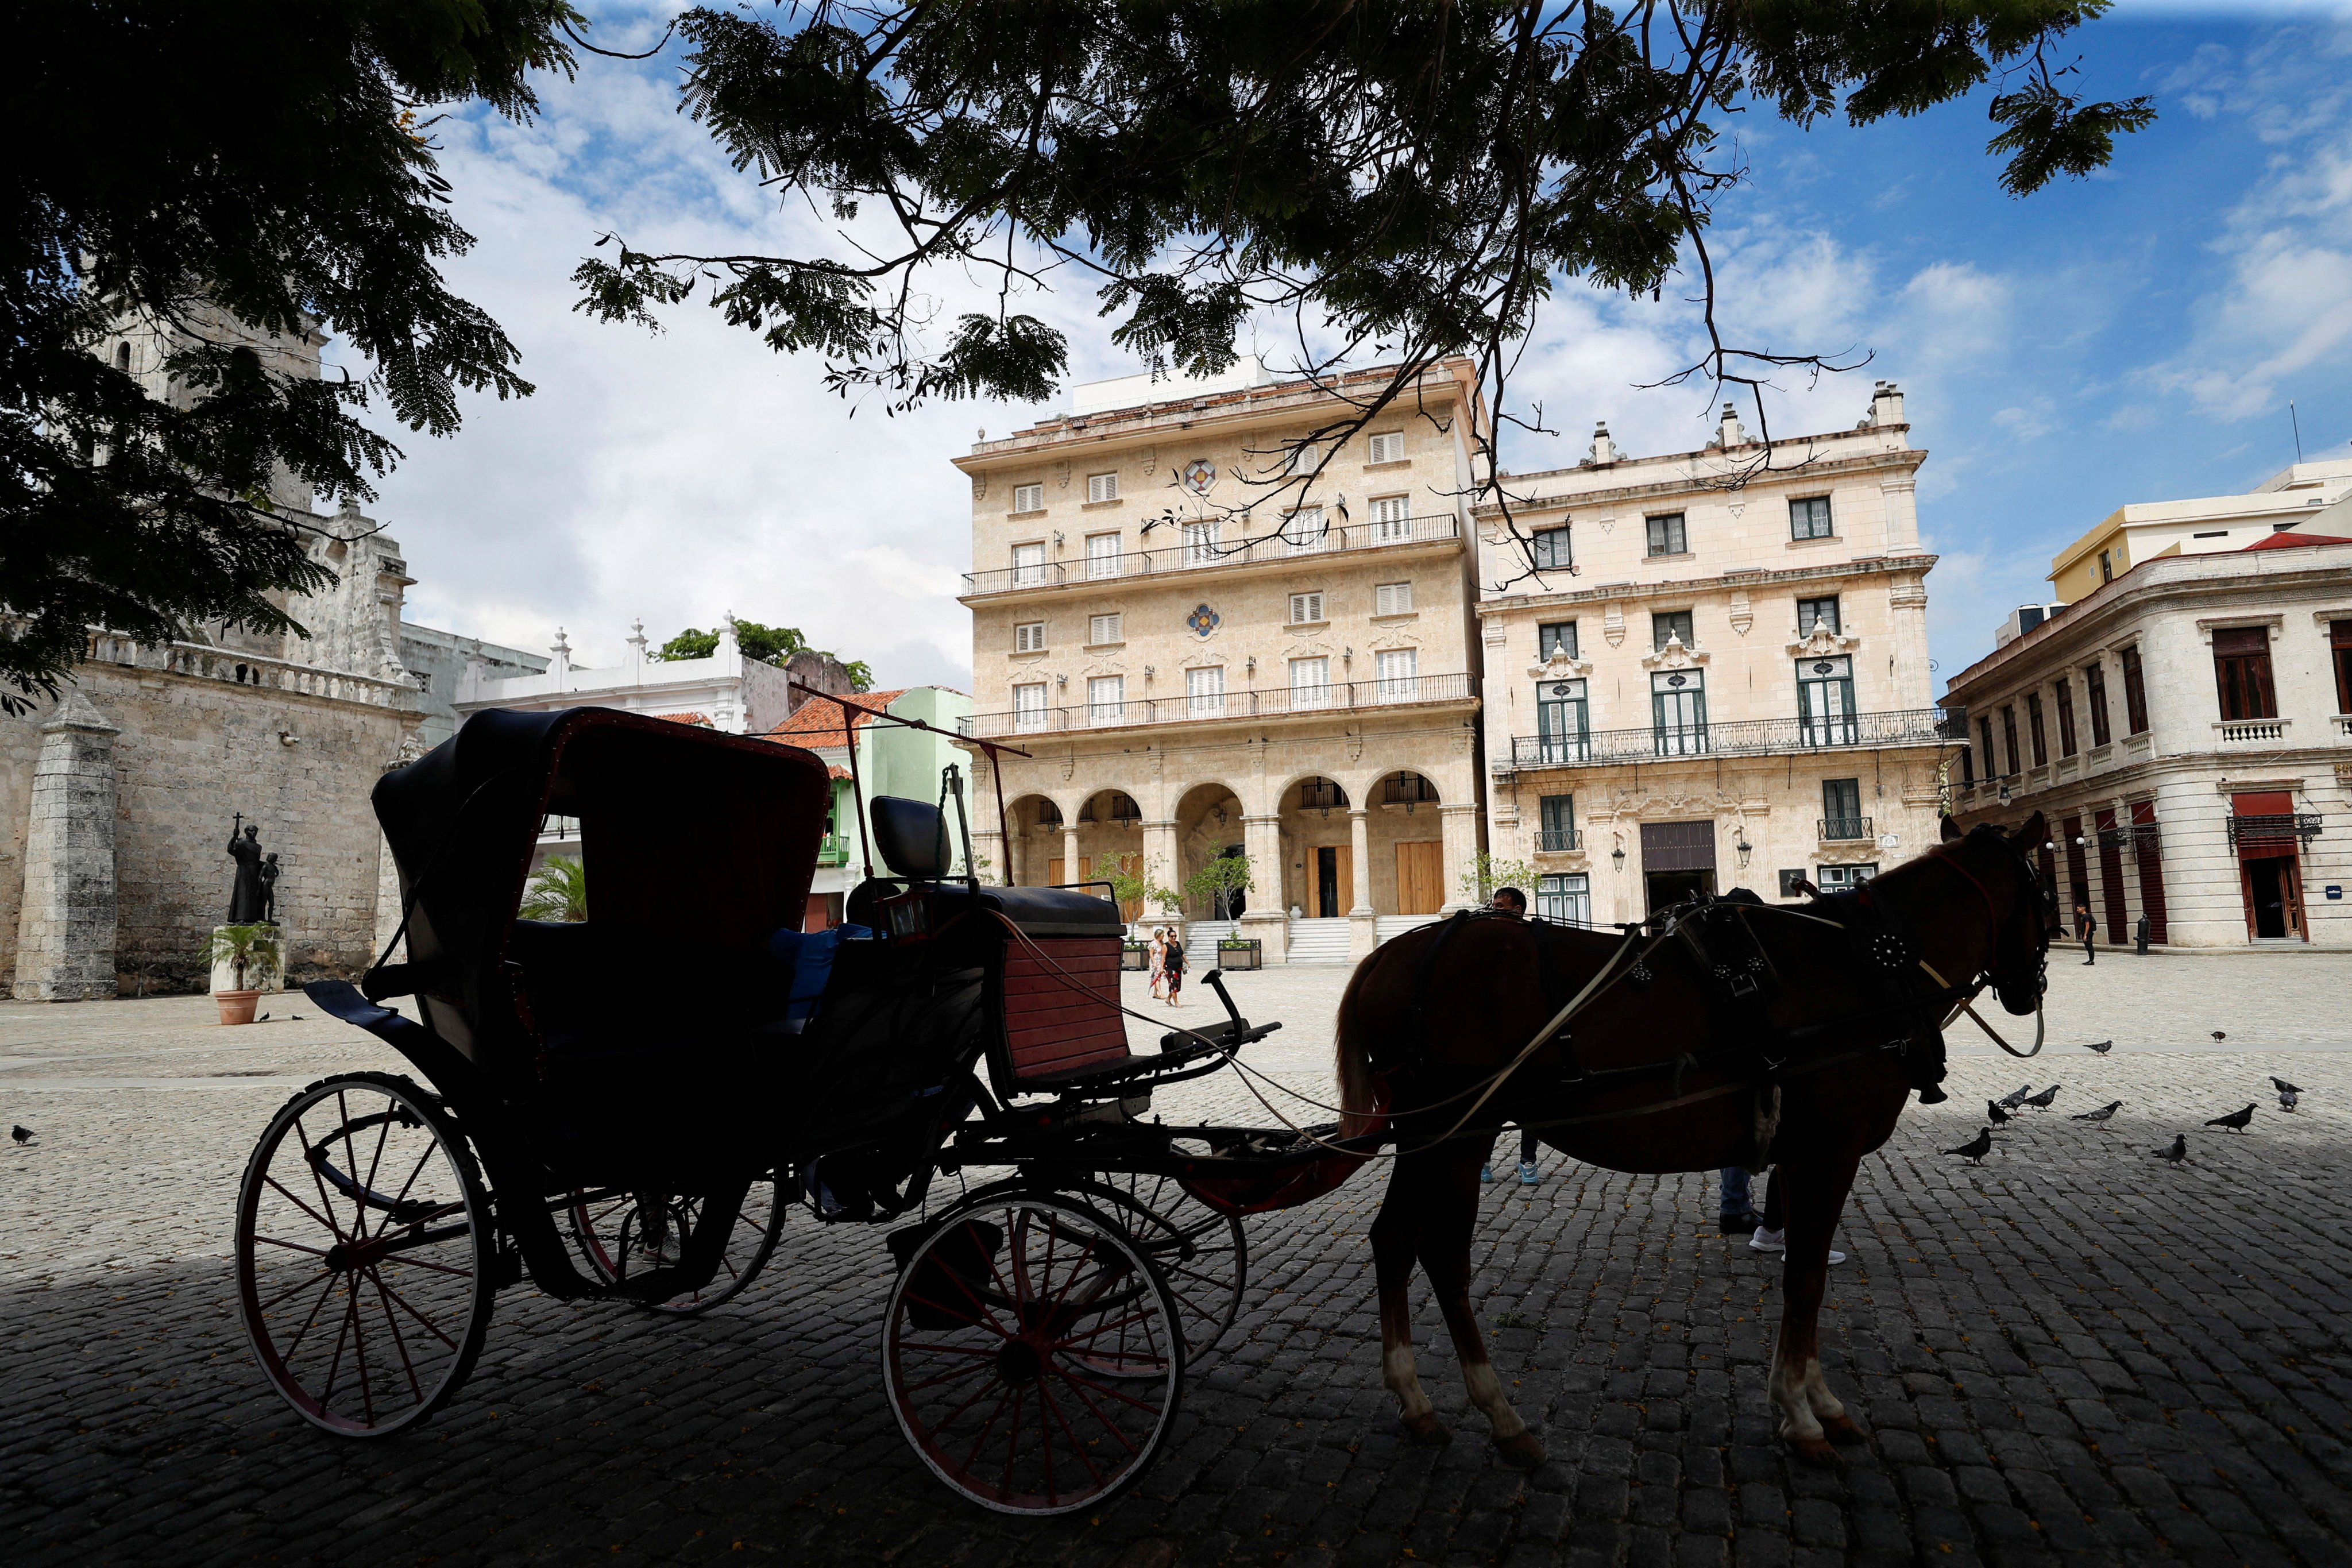 A horse-drawn carriage waits for tourists in a square in Havana, Cuba. The country has seen a sharp decline in visitors from the US and Europe and is trying to make up for this by wooing Chinese and Russian tourists. Photo: Reuters